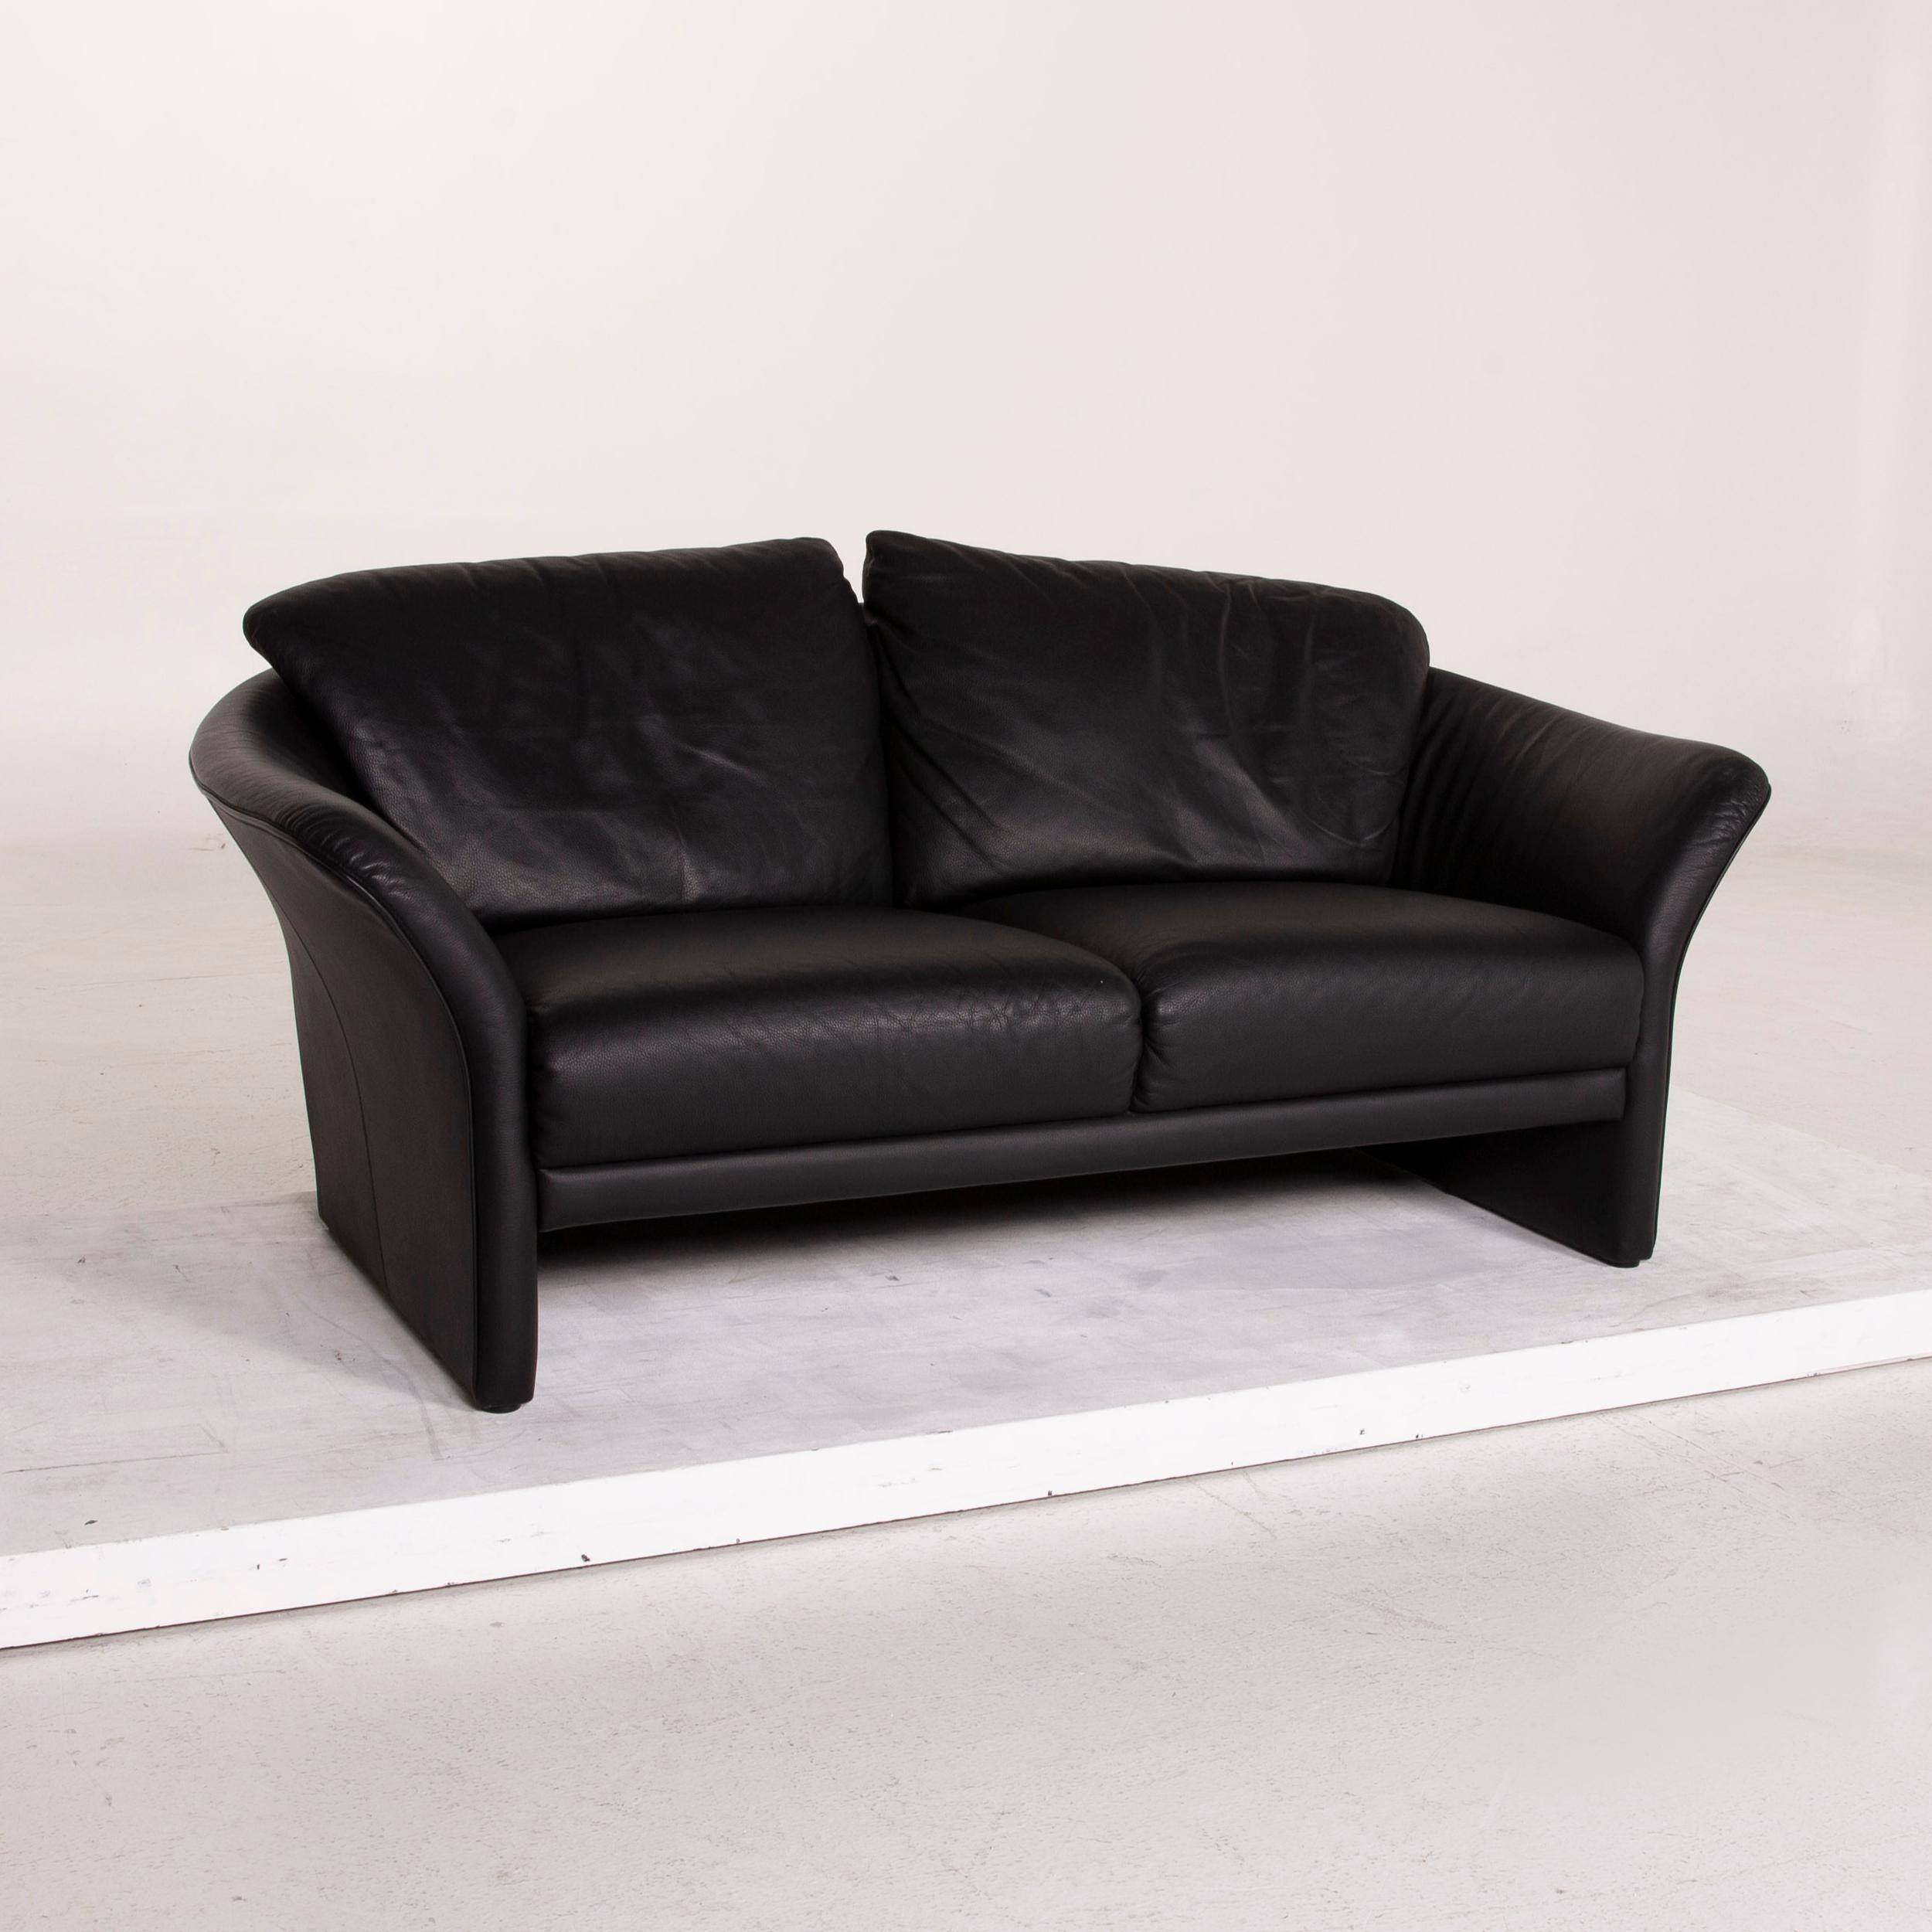 German Brühl & Sippold Boa Leather Sofa Black Two-Seat For Sale